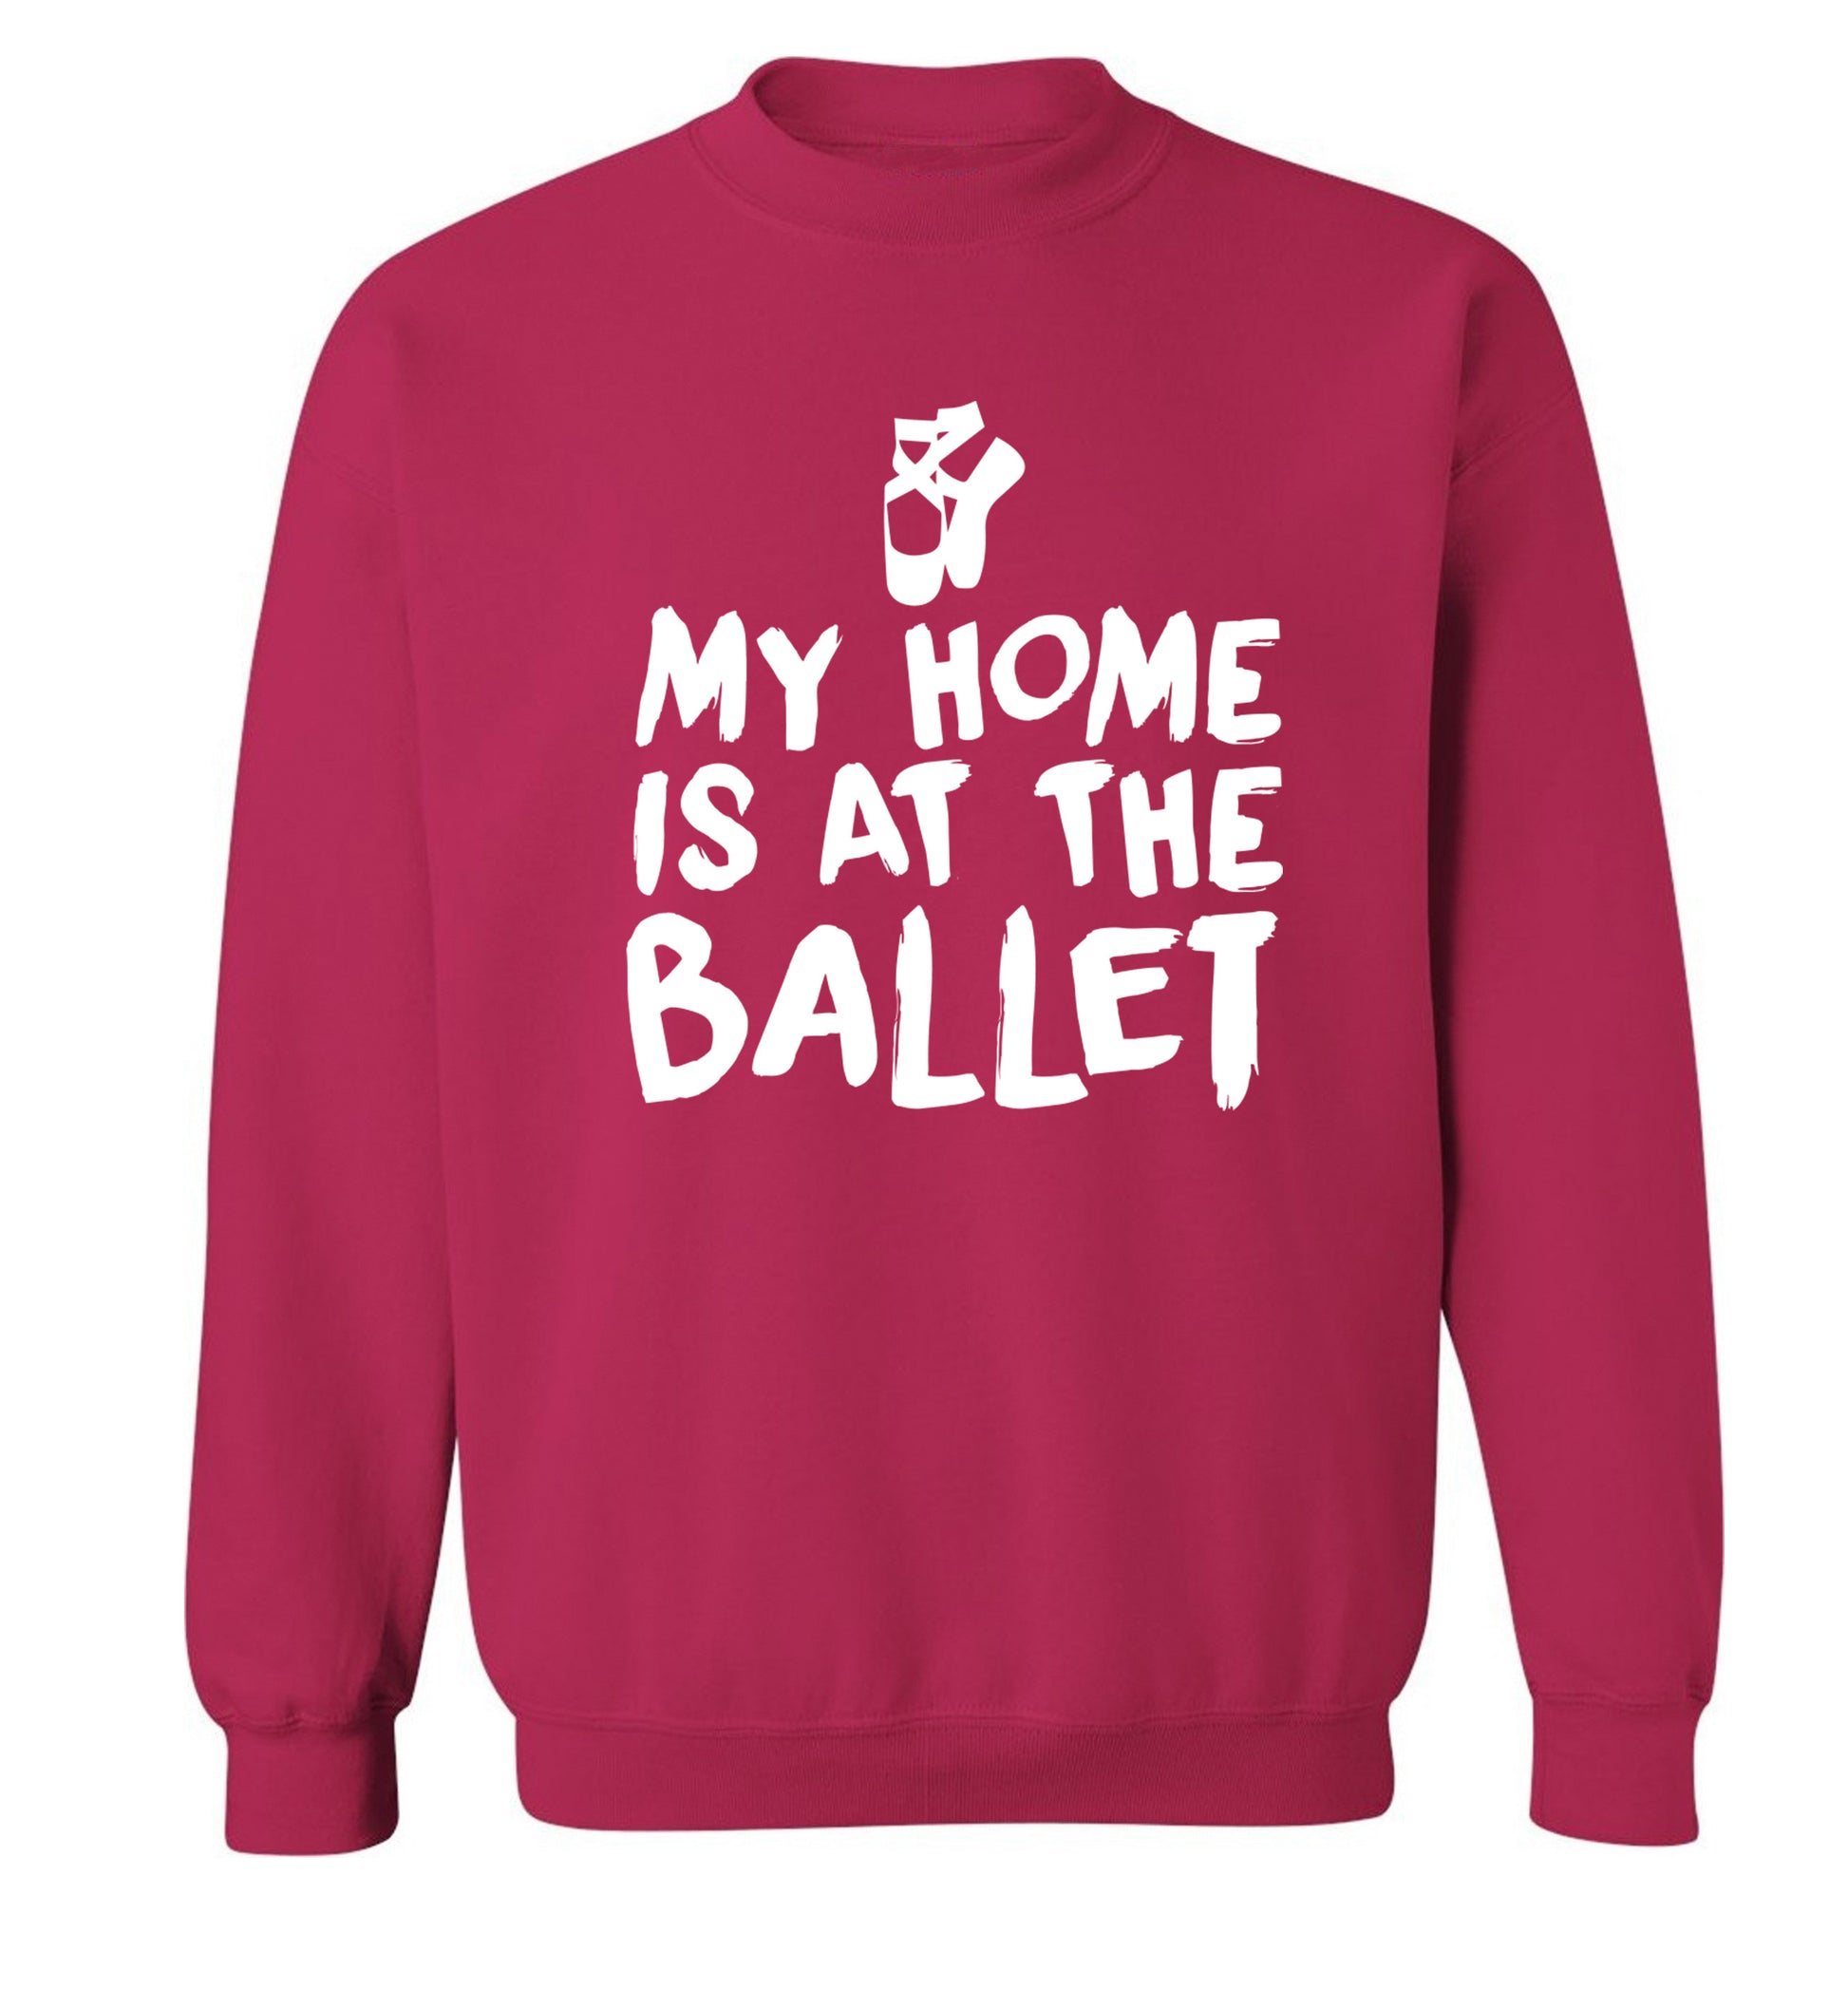 My home is at the dance studio Adult's unisex pink Sweater 2XL